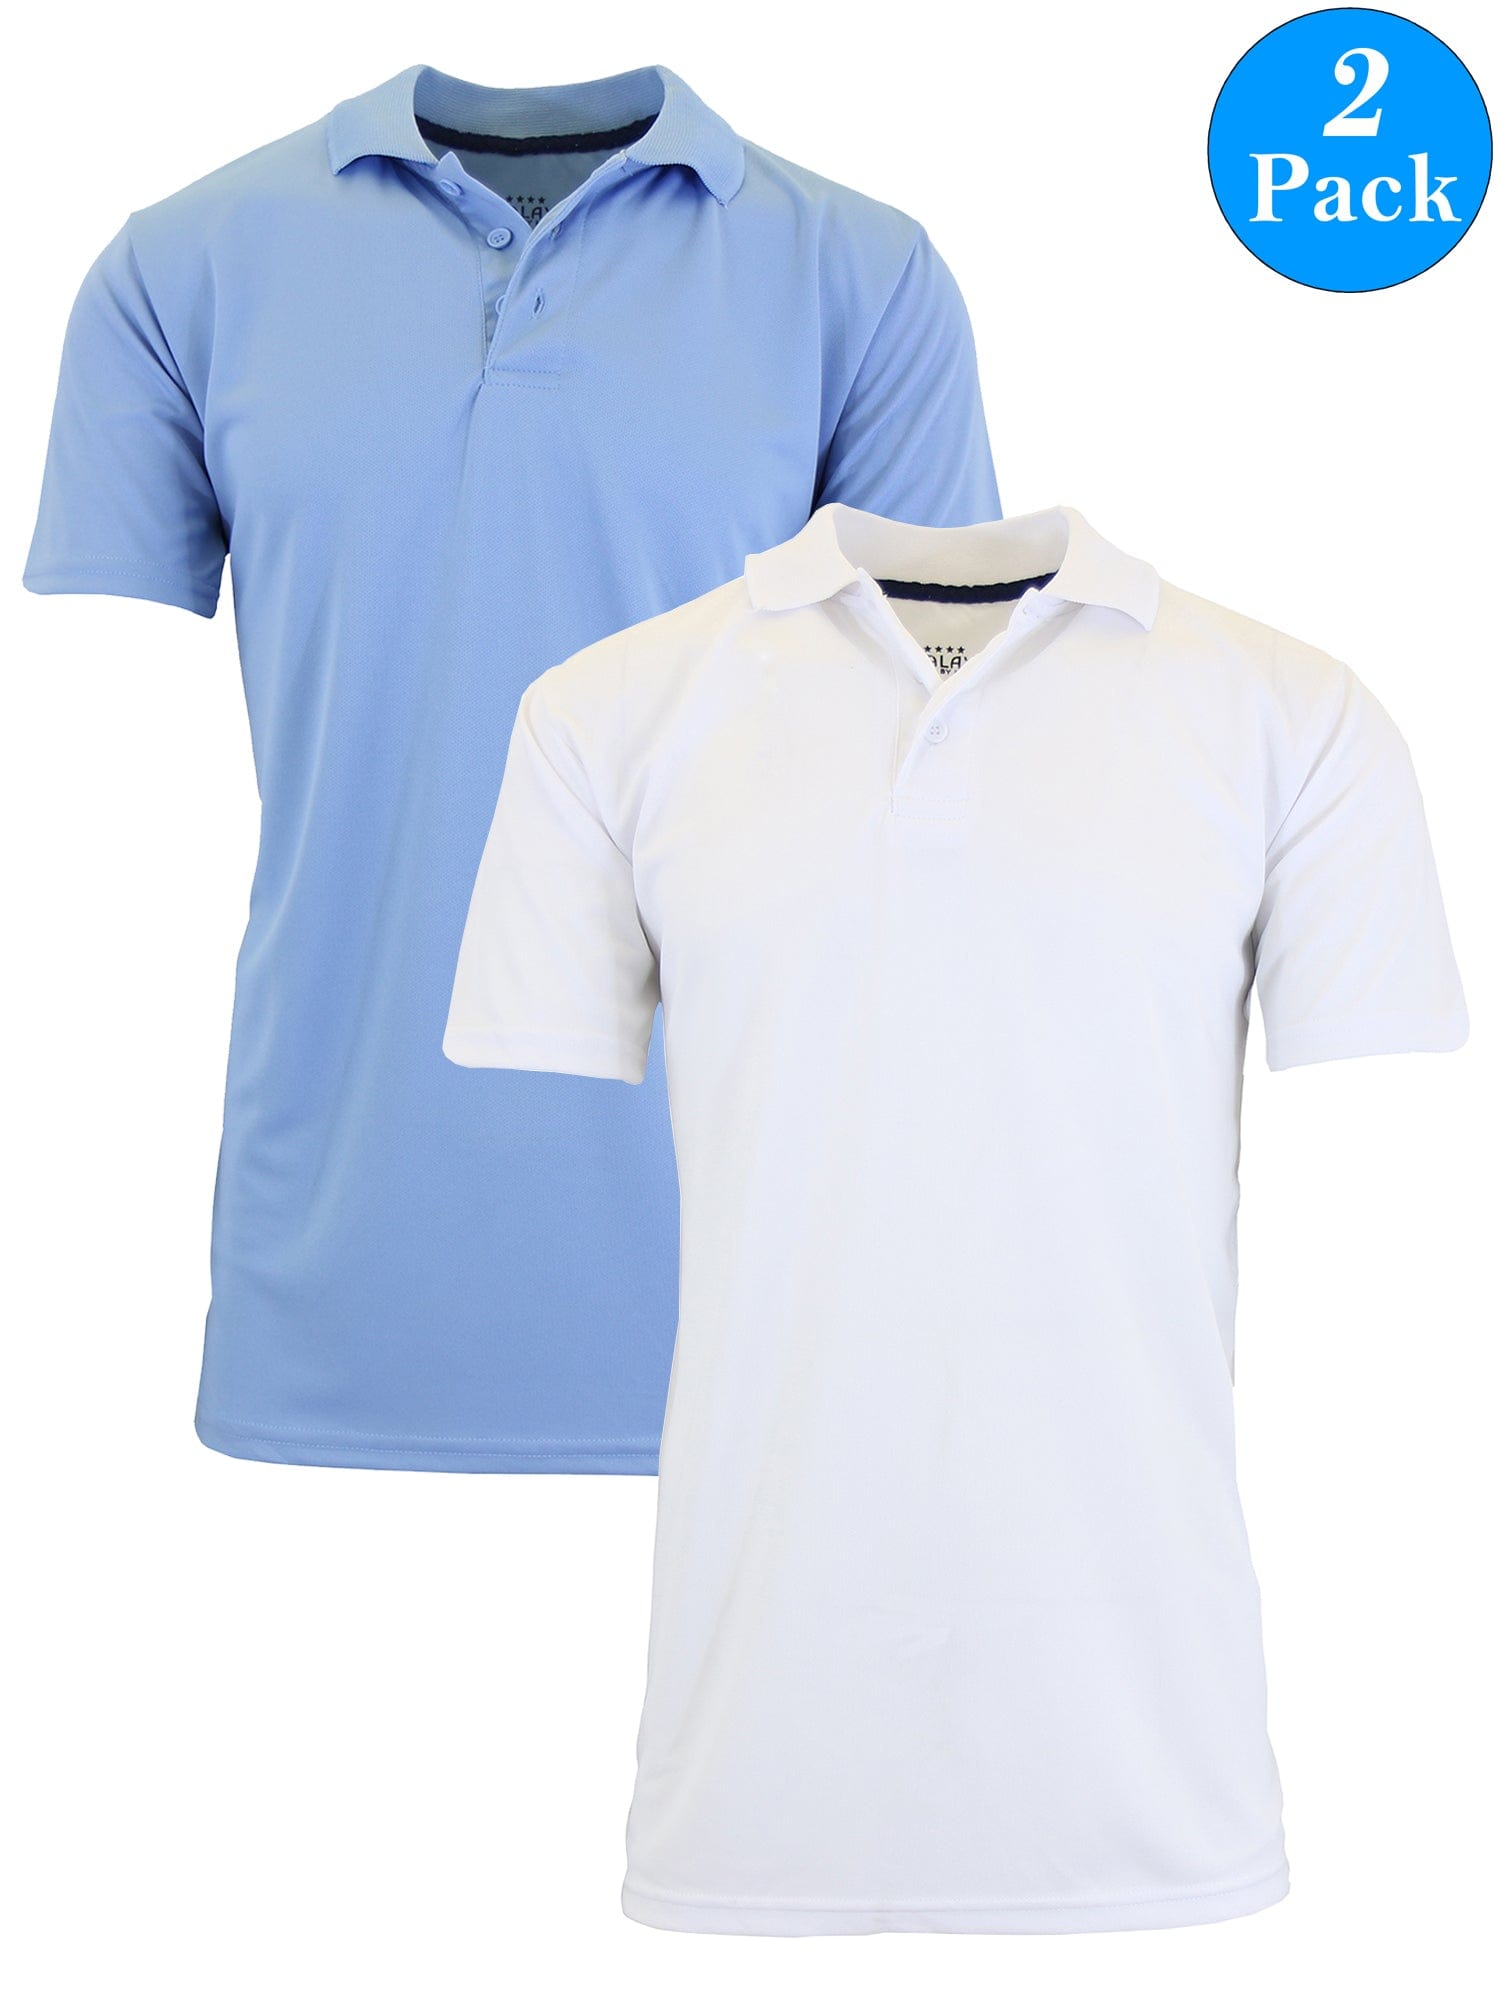 Men's Dry Fit Moisture-Wicking Polo Shirt (2-Pack) - GalaxybyHarvic